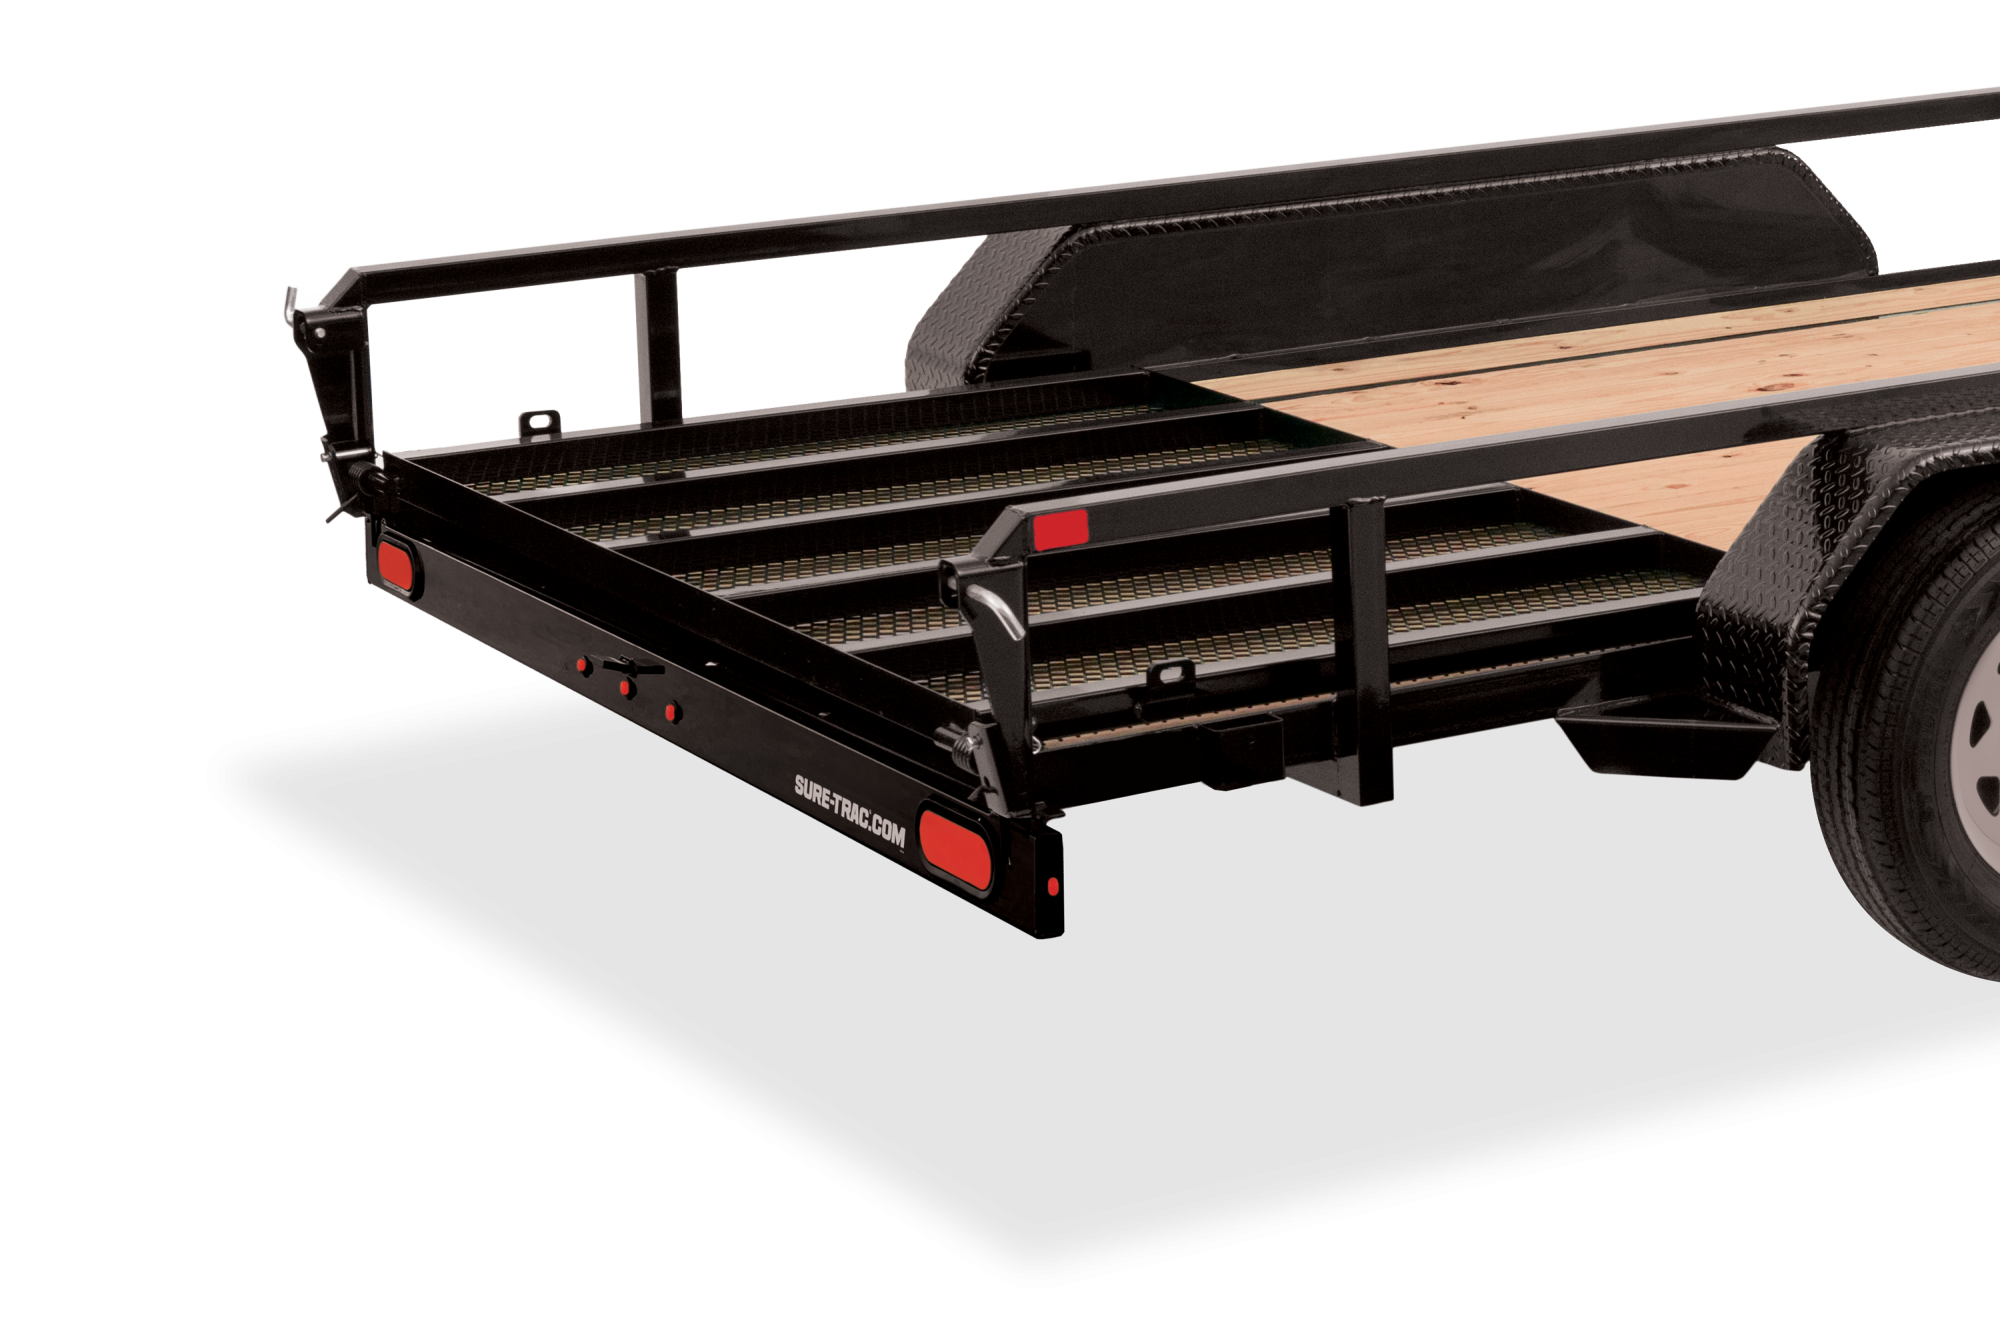 Sure-Trac | Tandem Axle Tube Top Utility | Image | Back side, tilted, Tandem Axle Tube Top Utility, gate on bed, close-up of gate, detail (2)